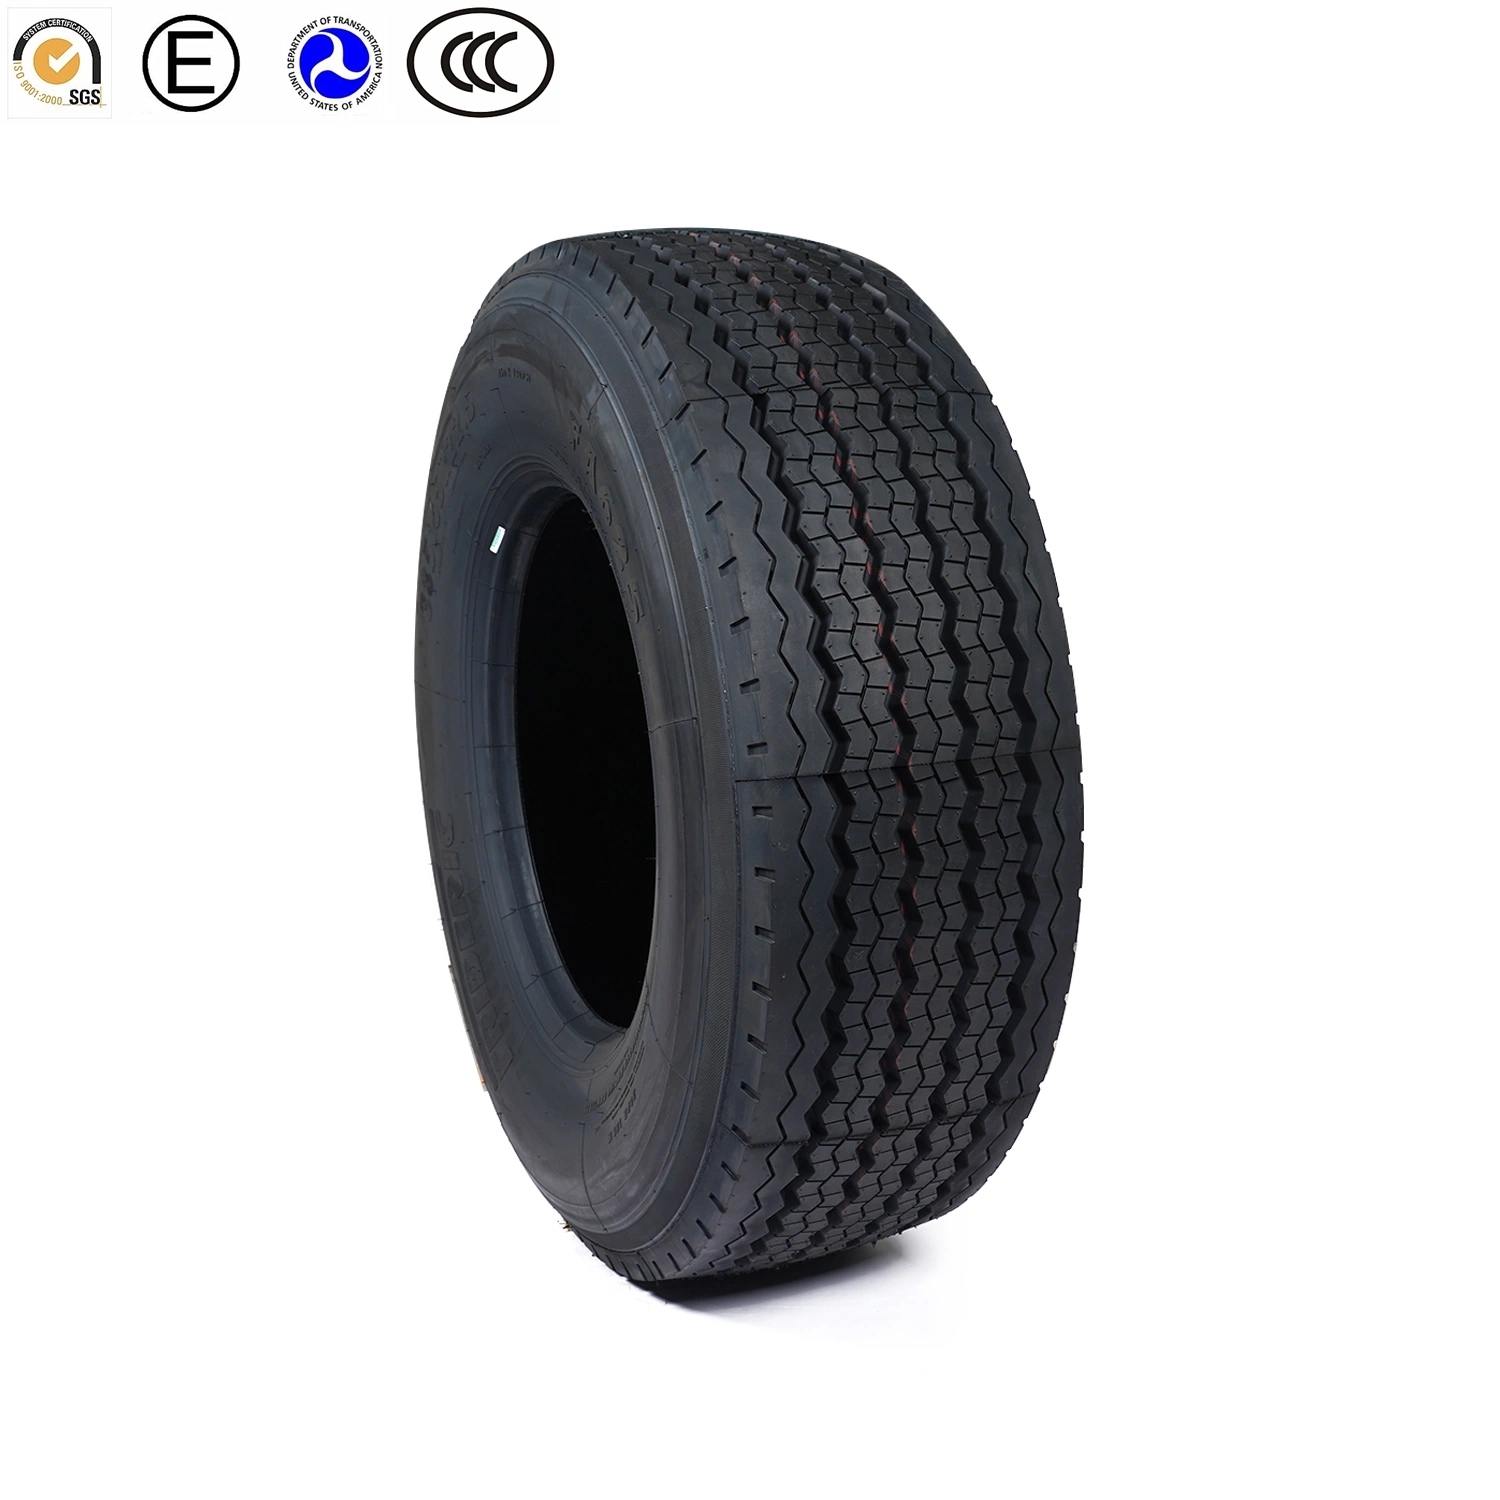 All Steel Radial Truck Tires Bus Tires TBR Tires Radial Tyre (11R22.5 12R22.5, 315/80R22.5 385/65R22.5)